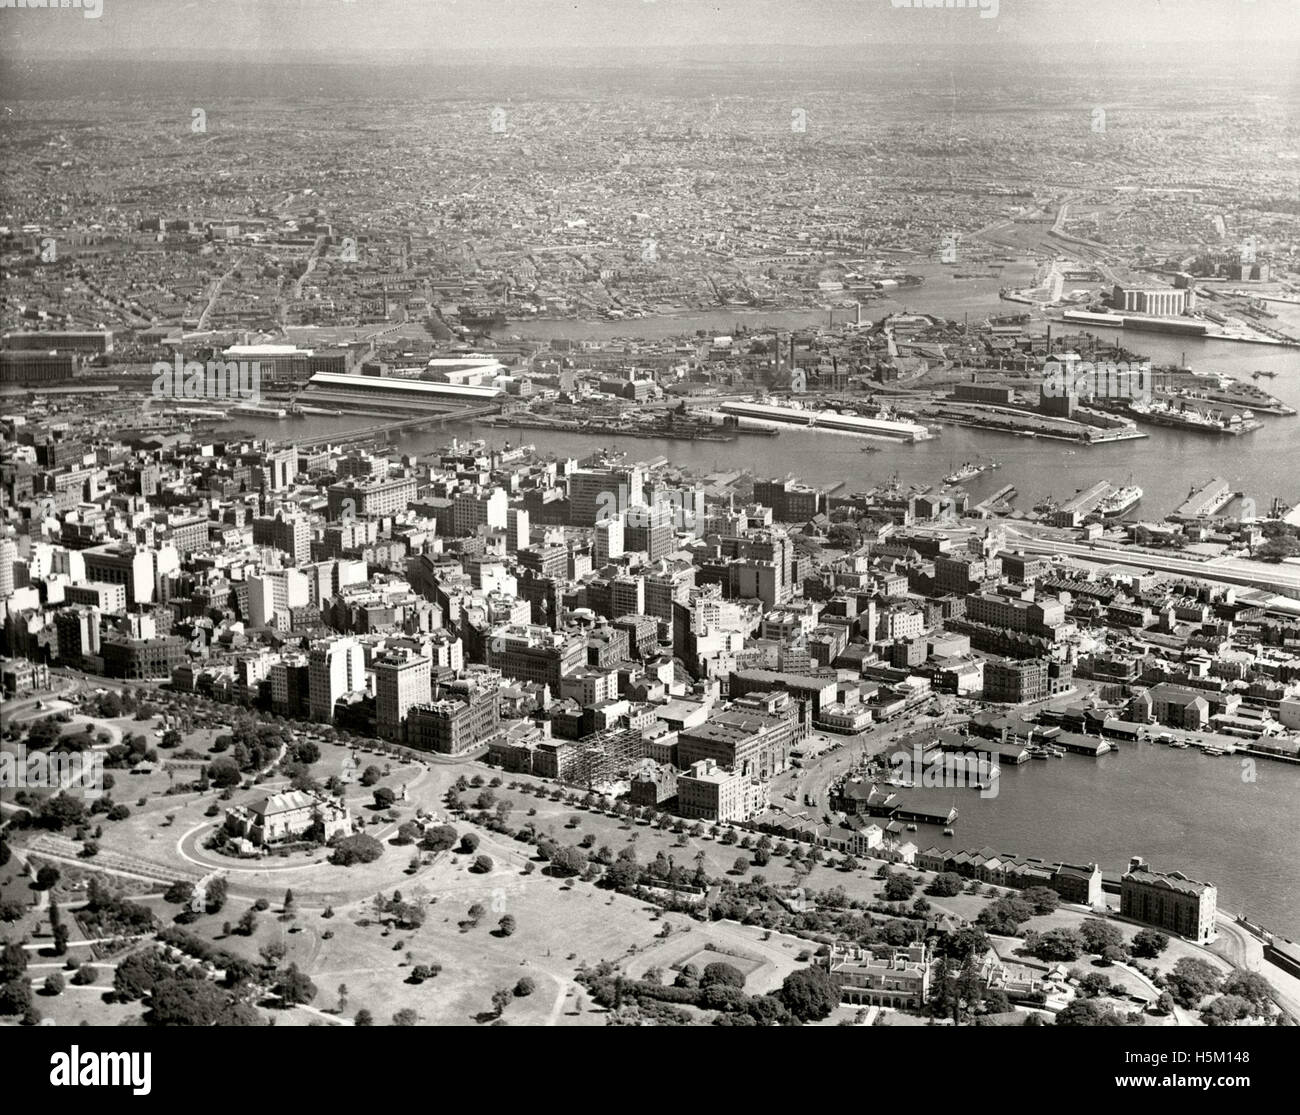 Circular Quay & Darling Harbour - 29th March 1937 Stock Photo